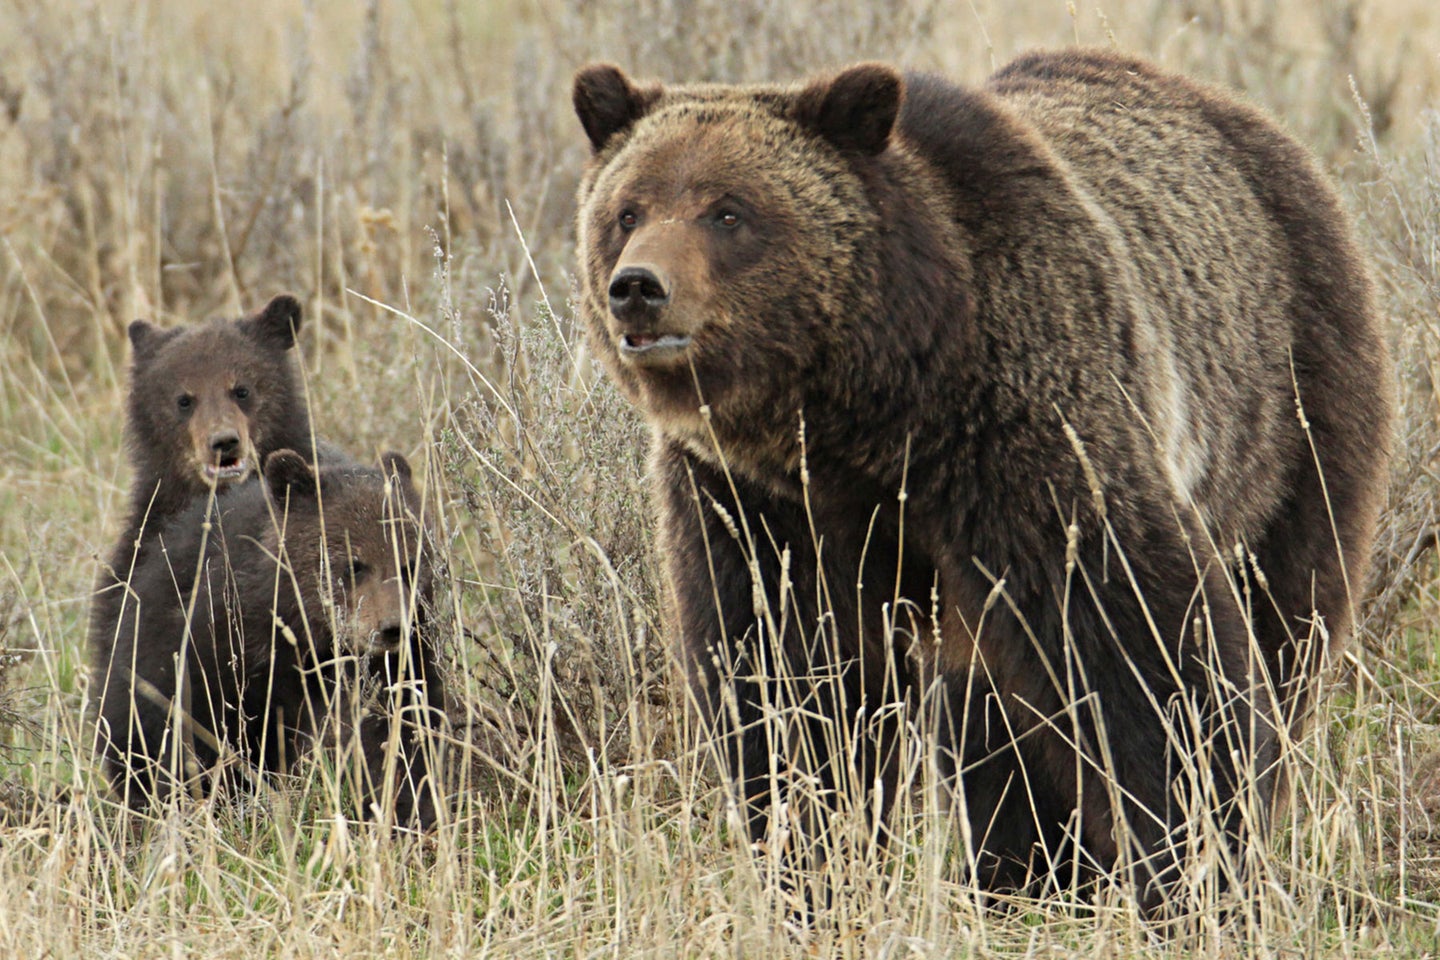 Agents shot and killed the sow grizzly after capturing it's 47-pound male cub. 